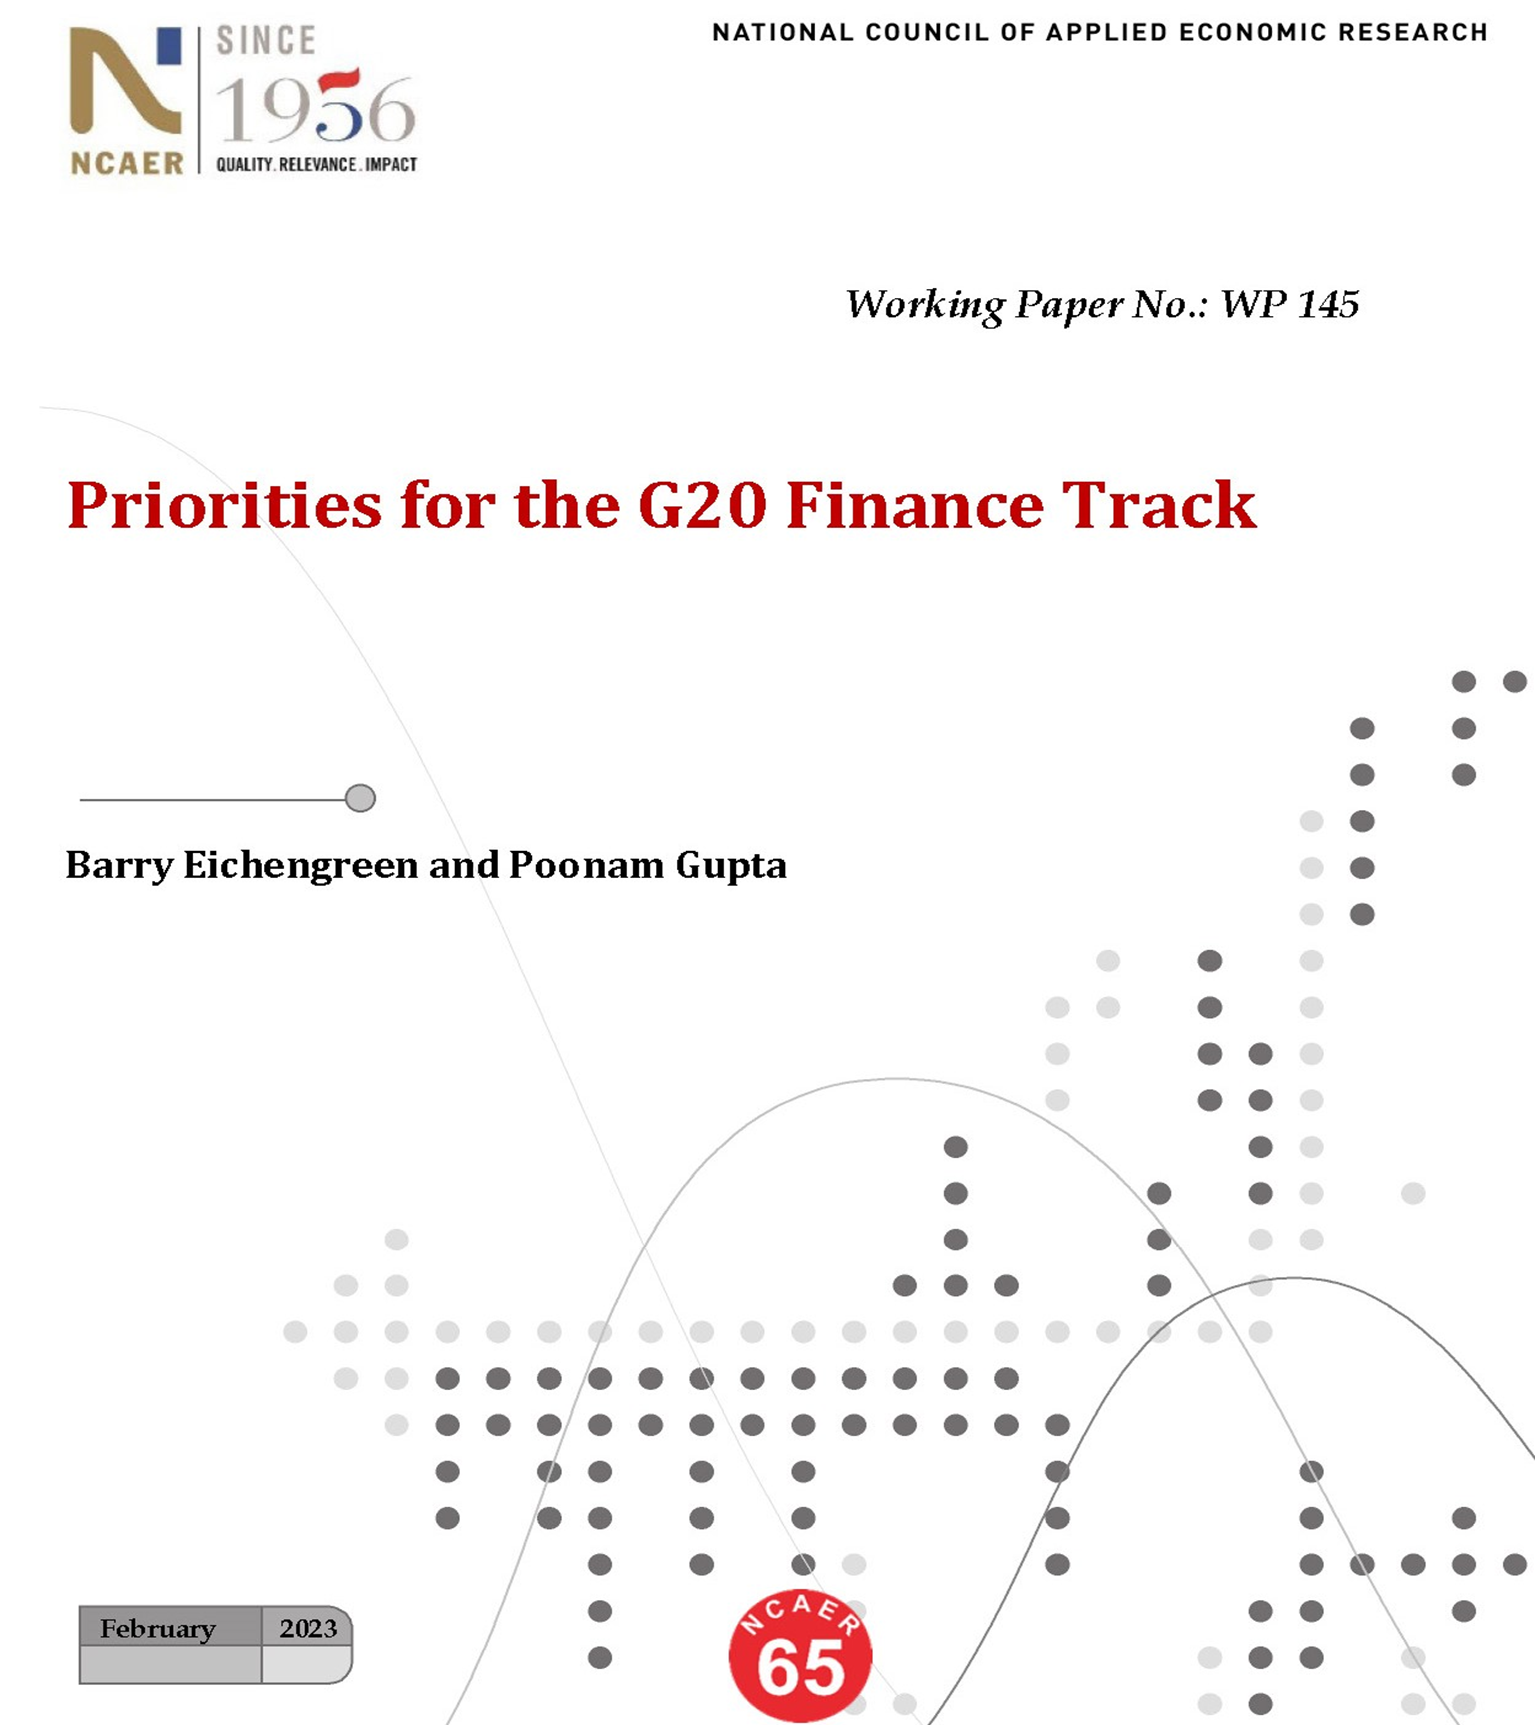 Priorities for the G20 Finance Track